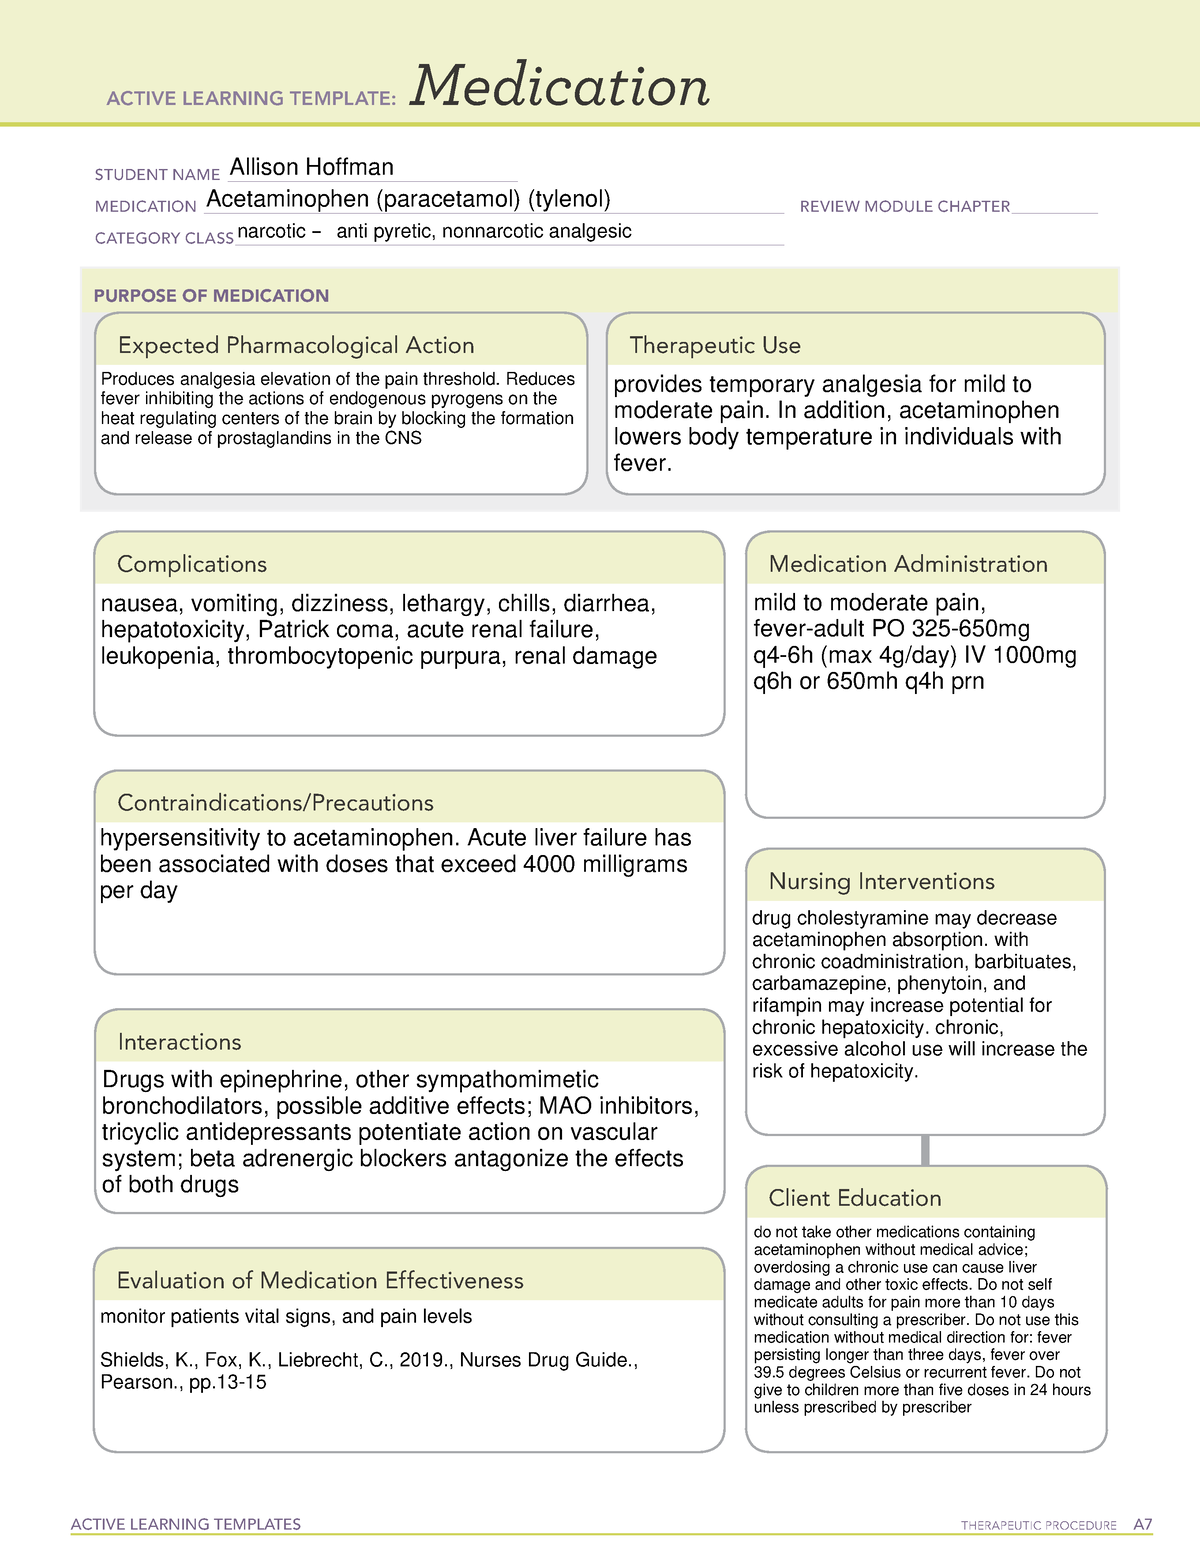 acetaminophen-med-card-active-learning-templates-therapeutic-procedure-a-medication-student